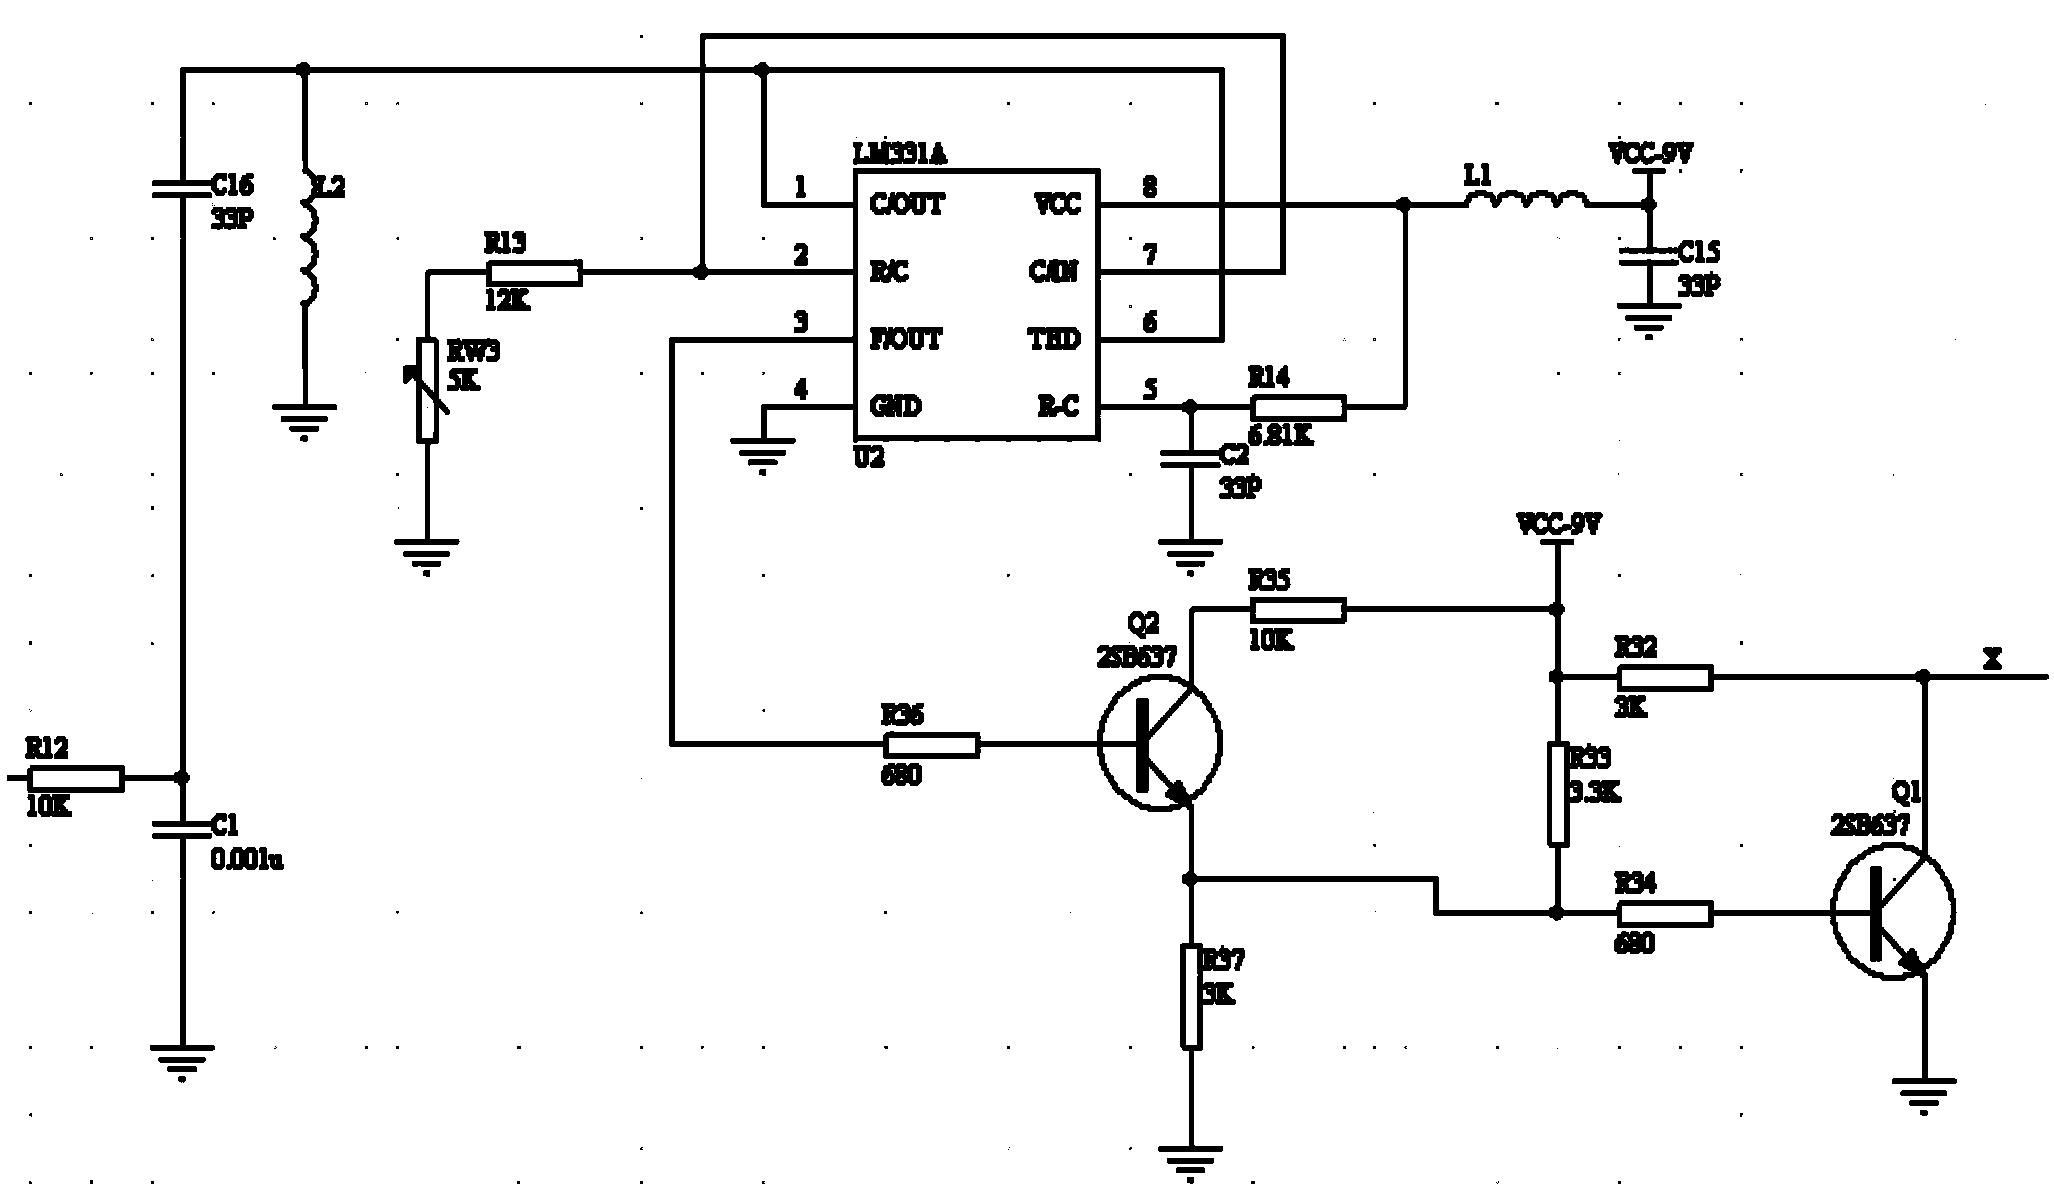 Voltage frequency conversion circuit for photometric system